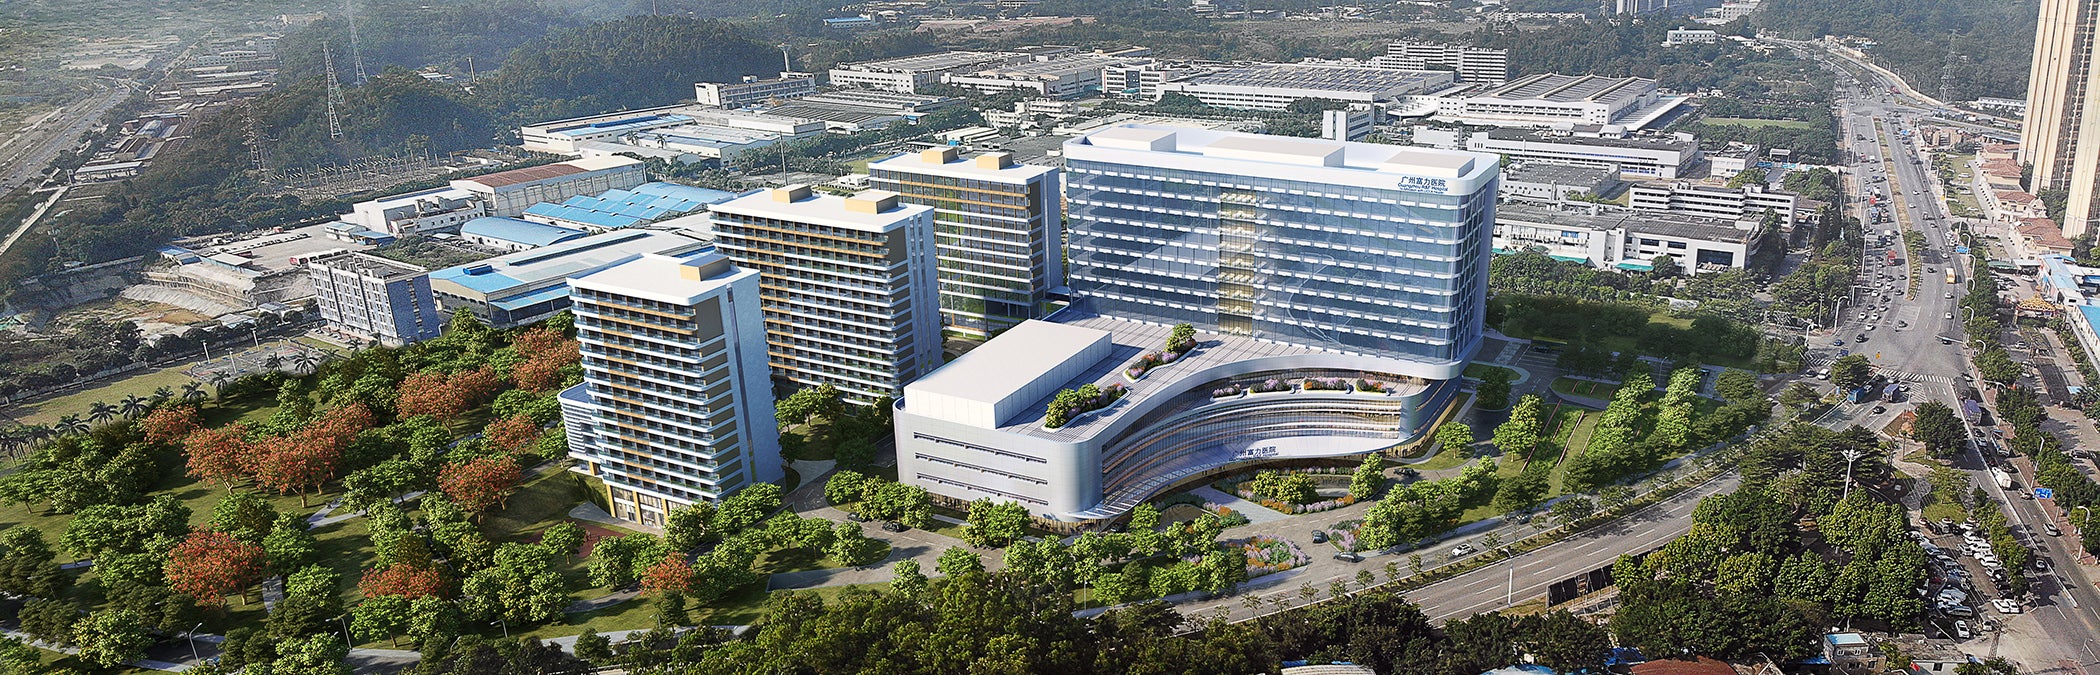 Guangzhou R&F International Hospital in Affiliation with UCLA Health | HDR